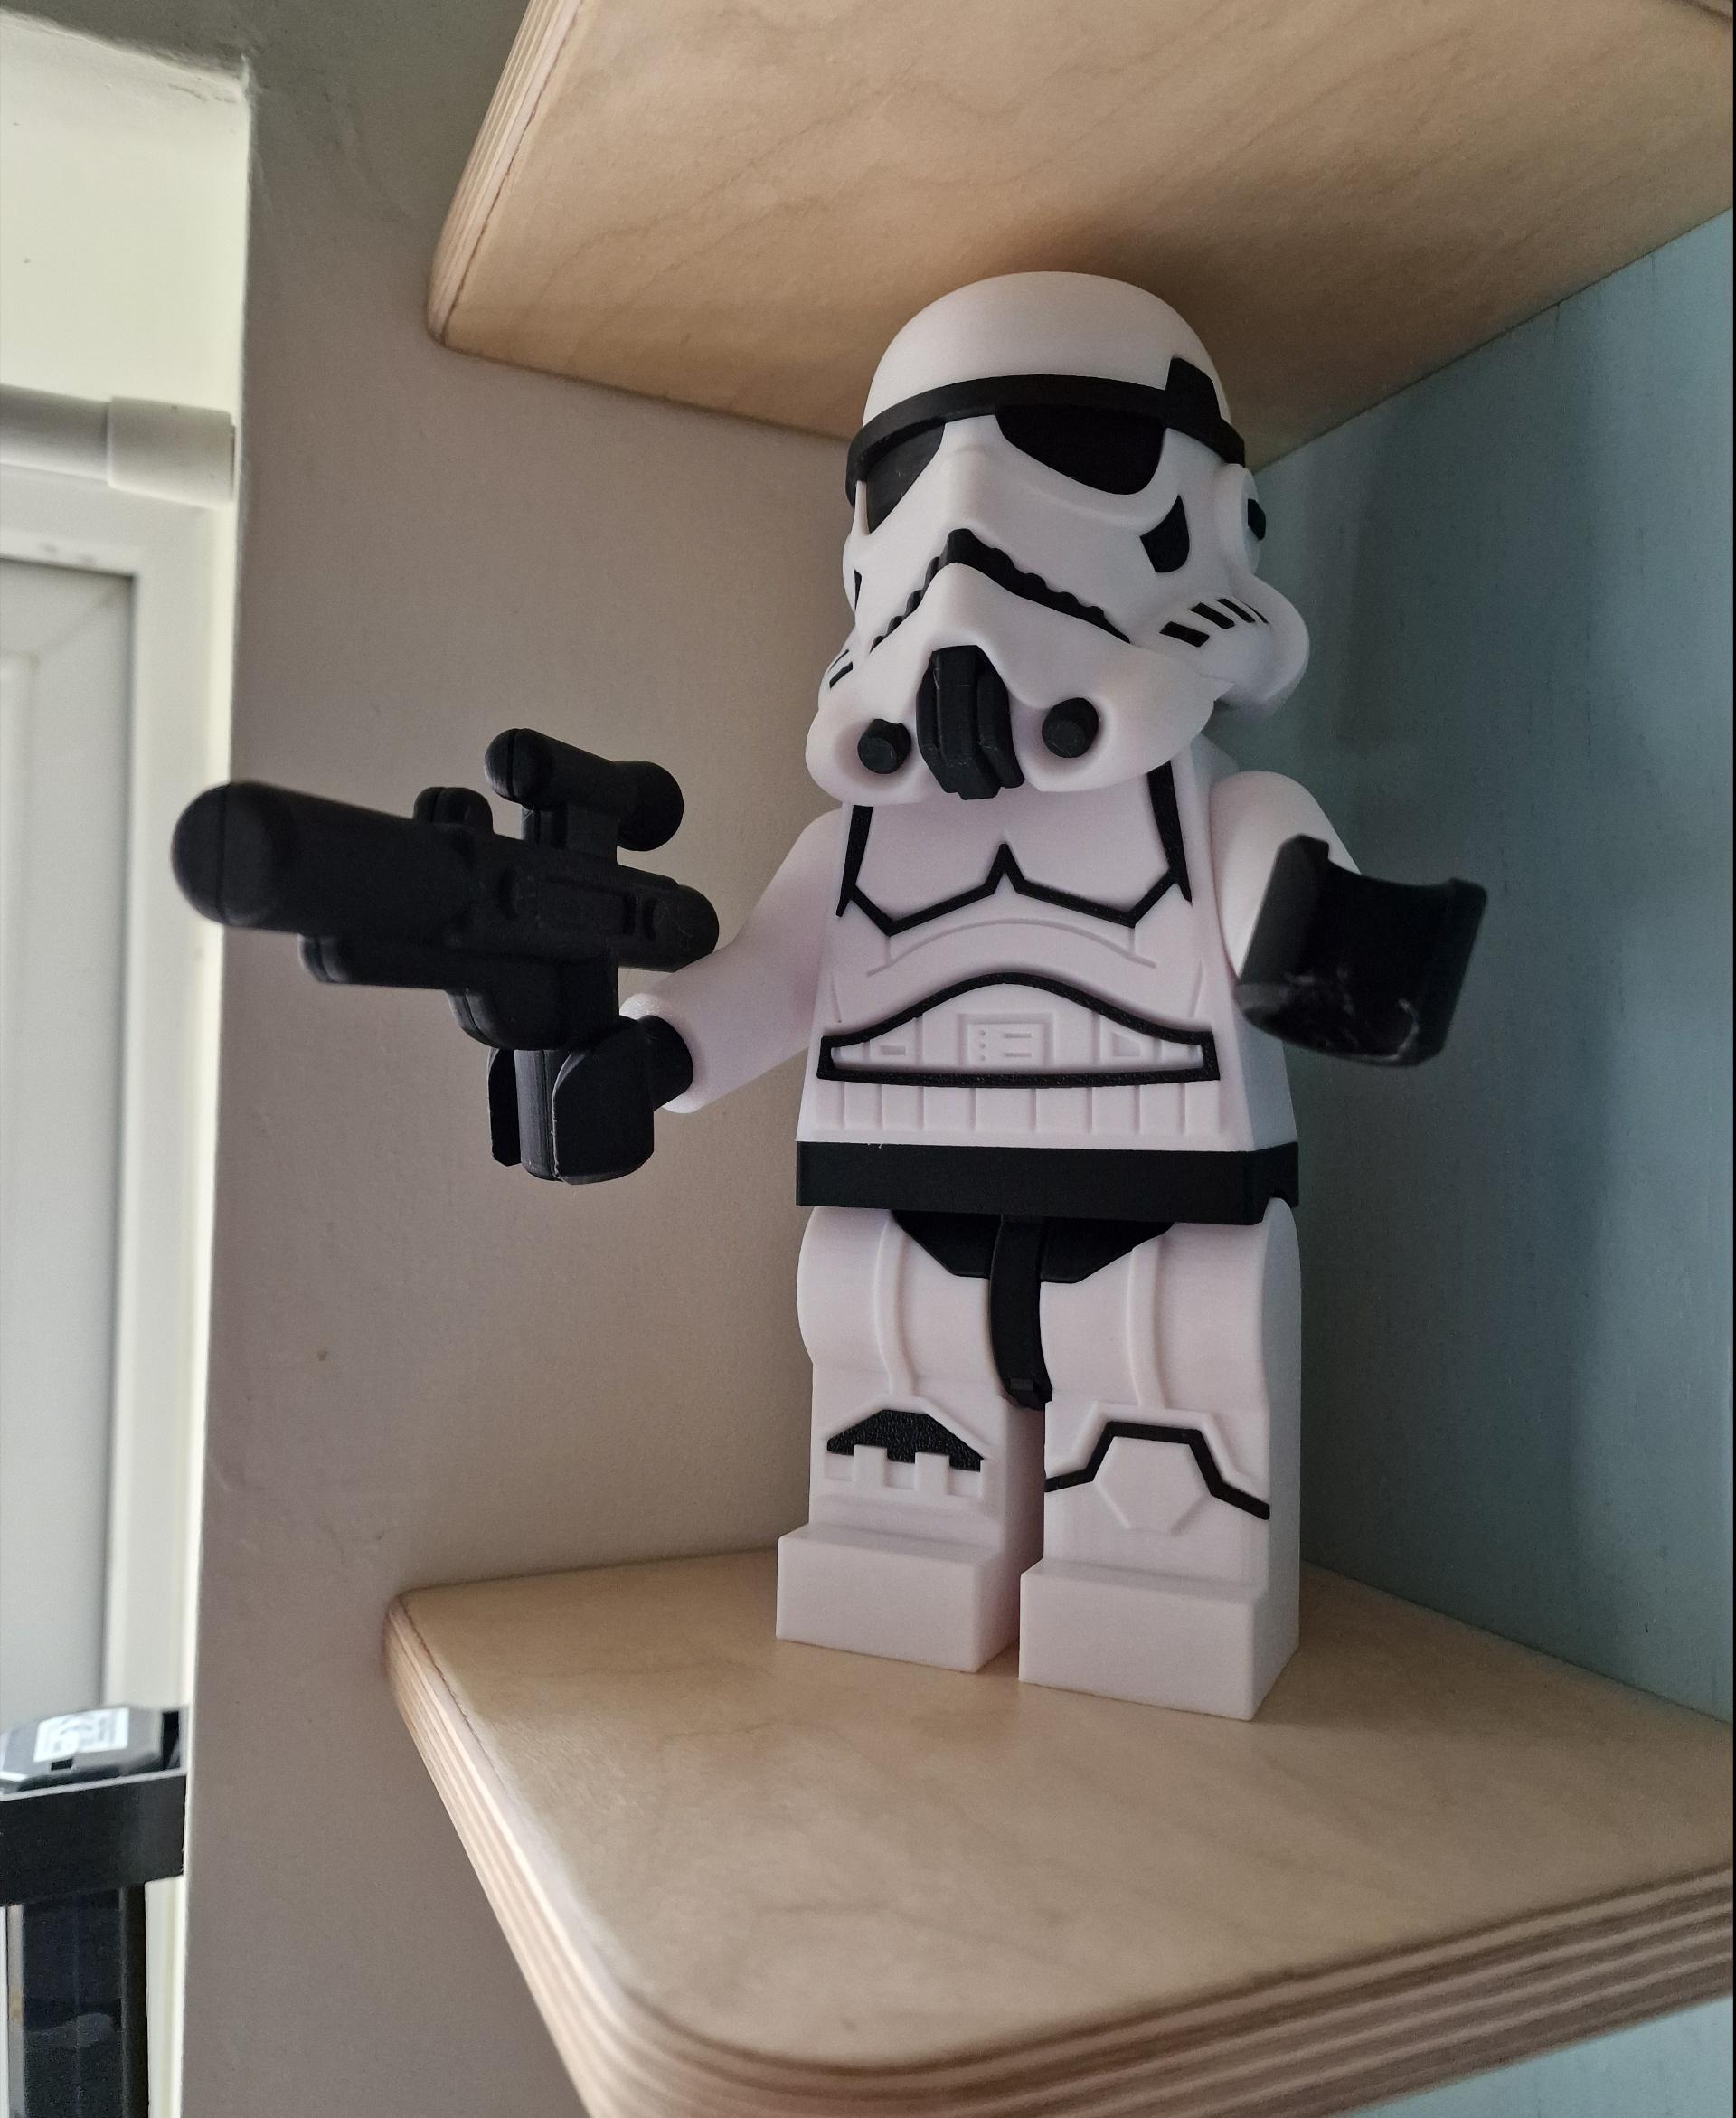 Stormtrooper (9 inch brick figure, NO MMU/AMS, NO supports, NO glue) - Printed with a 0.4 nozzle at 0.08 layer height for the nice contours and minimal stair stepping. A great model and demo of dimensional accuracy and great part design.

Done in Sunlu PLA+ black and white. - 3d model